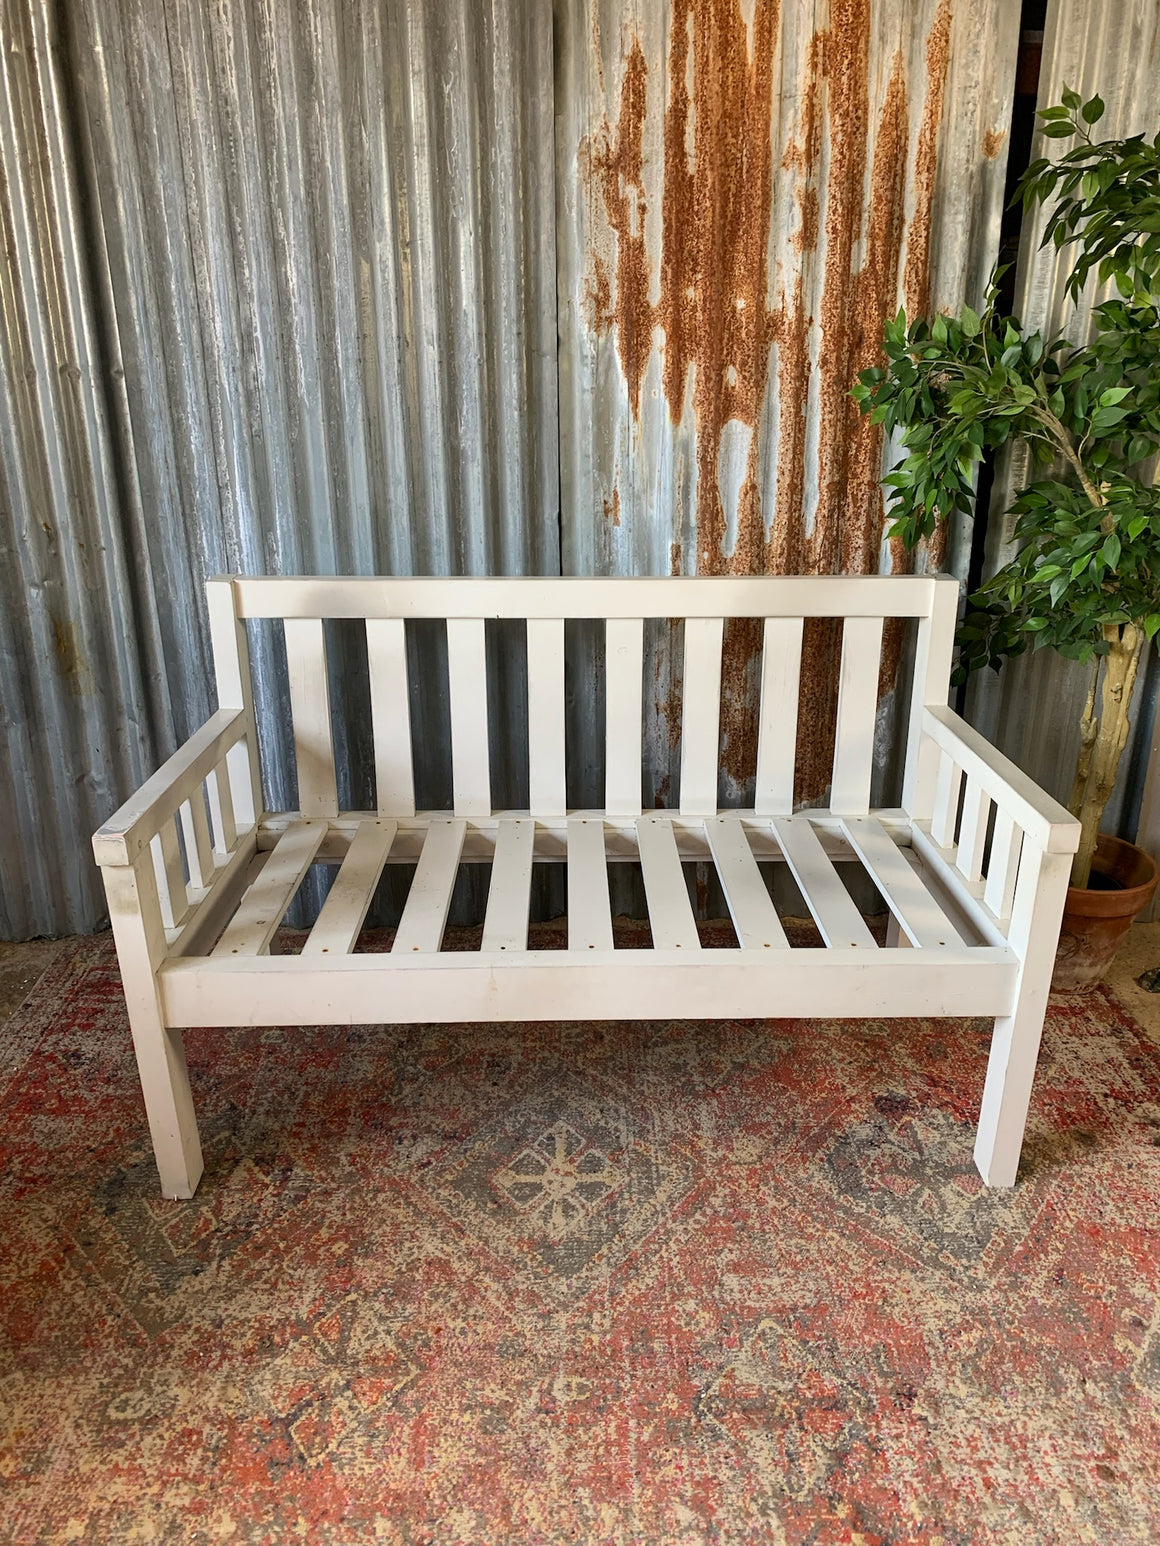 A large slatted wooden garden bench